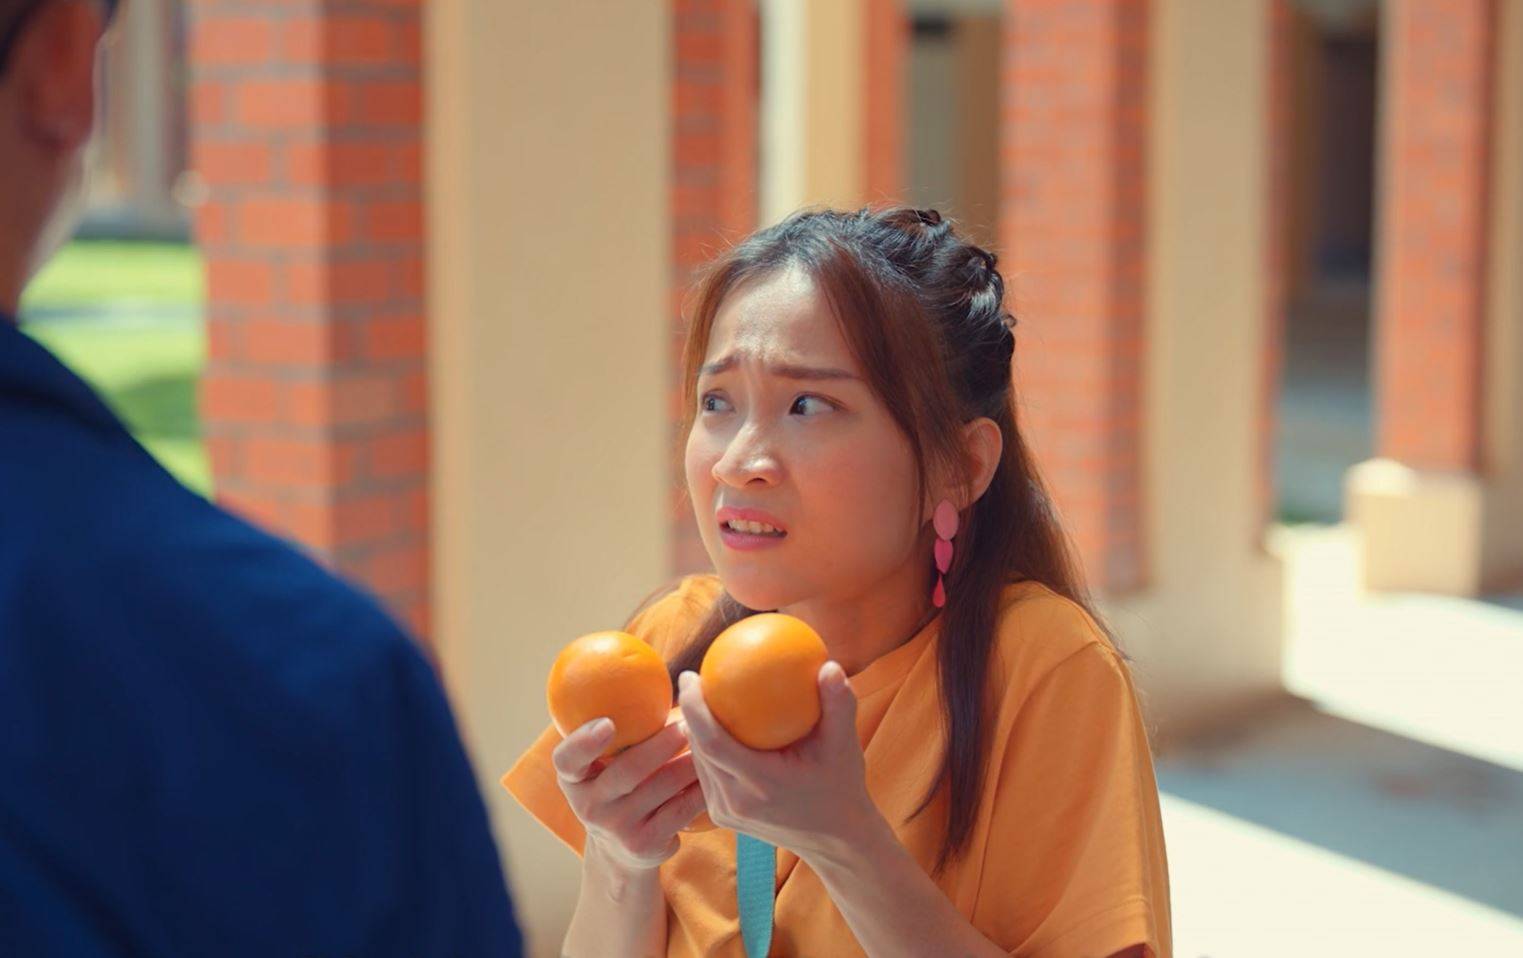 SG Enable UnAwkward: A girl awkwardly holds oranges, unsure what to say